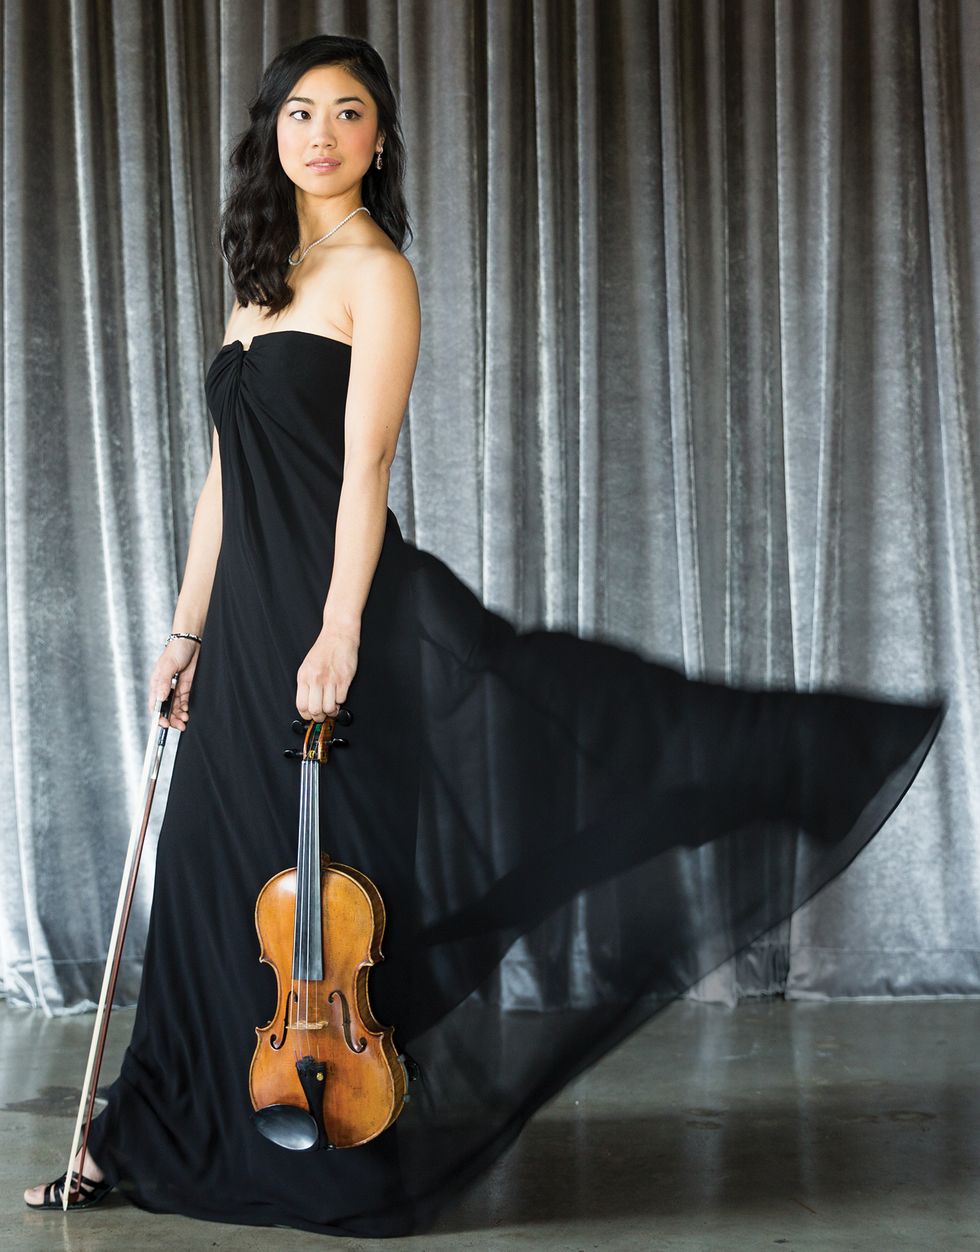 A New Zealand native who moved to the U.S. in 2007 to study music, violinist NATALIE LIN, 28, found Houston to be unique. Not only thanks to its welcoming nature, but also because something was lacking: Houston was one of the only major cities without a conductorless — meaning collaborative — orchestra. Lin, who’s finishing up her doctorate at Rice, founded Kinetic in 2015 to bridge the gap between traditional chamber music, like a string quartet, and a full orchestra. Her 16-member group is notably without an artistic director who calls the shots. “We make sure everyone has their voice heard and is comfortable speaking up and trying different ideas,” she says. Kinetic closes out its second season on May 6 with a performance celebrating local talent, such as composer Pierre Jalbert, called “Made in Houston” at MATCH.